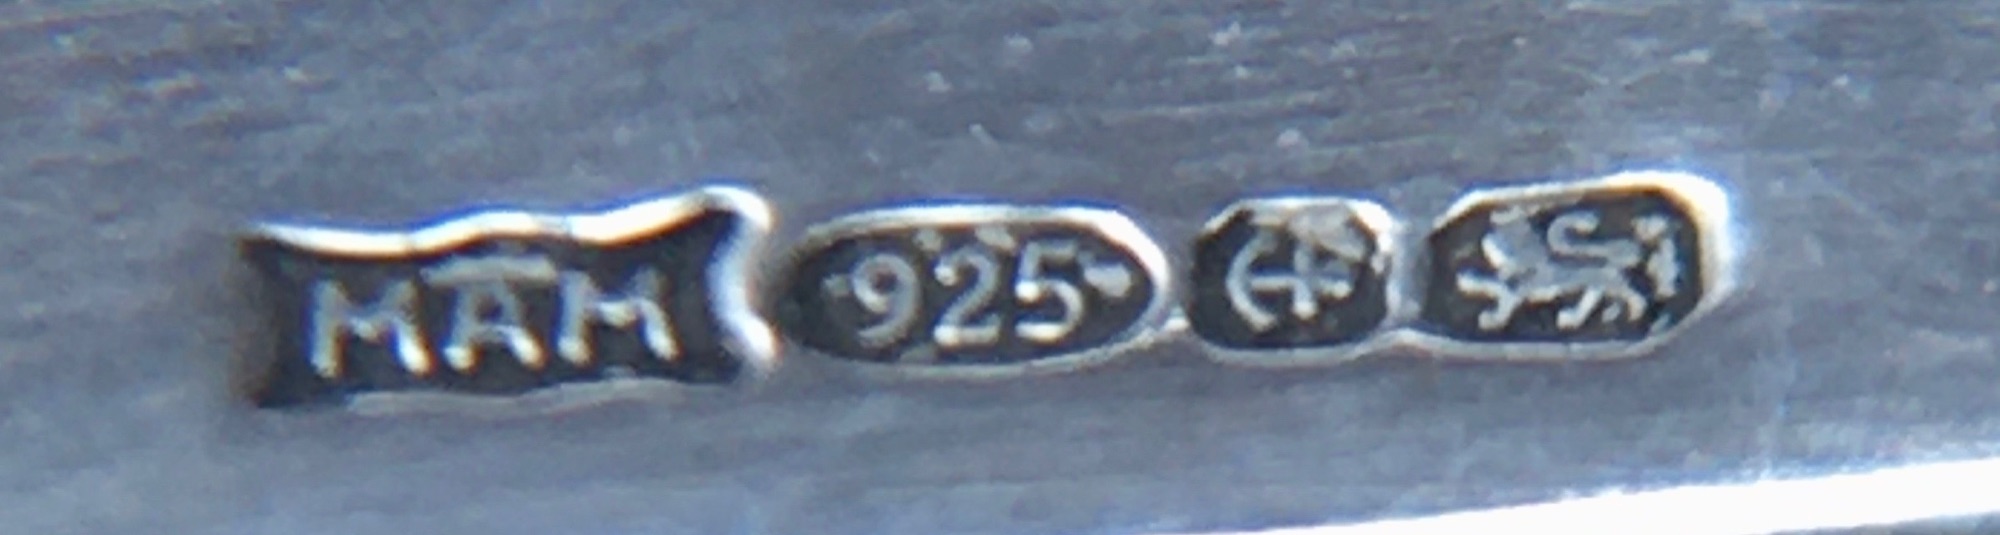 Picture of a sterling silver hallmark